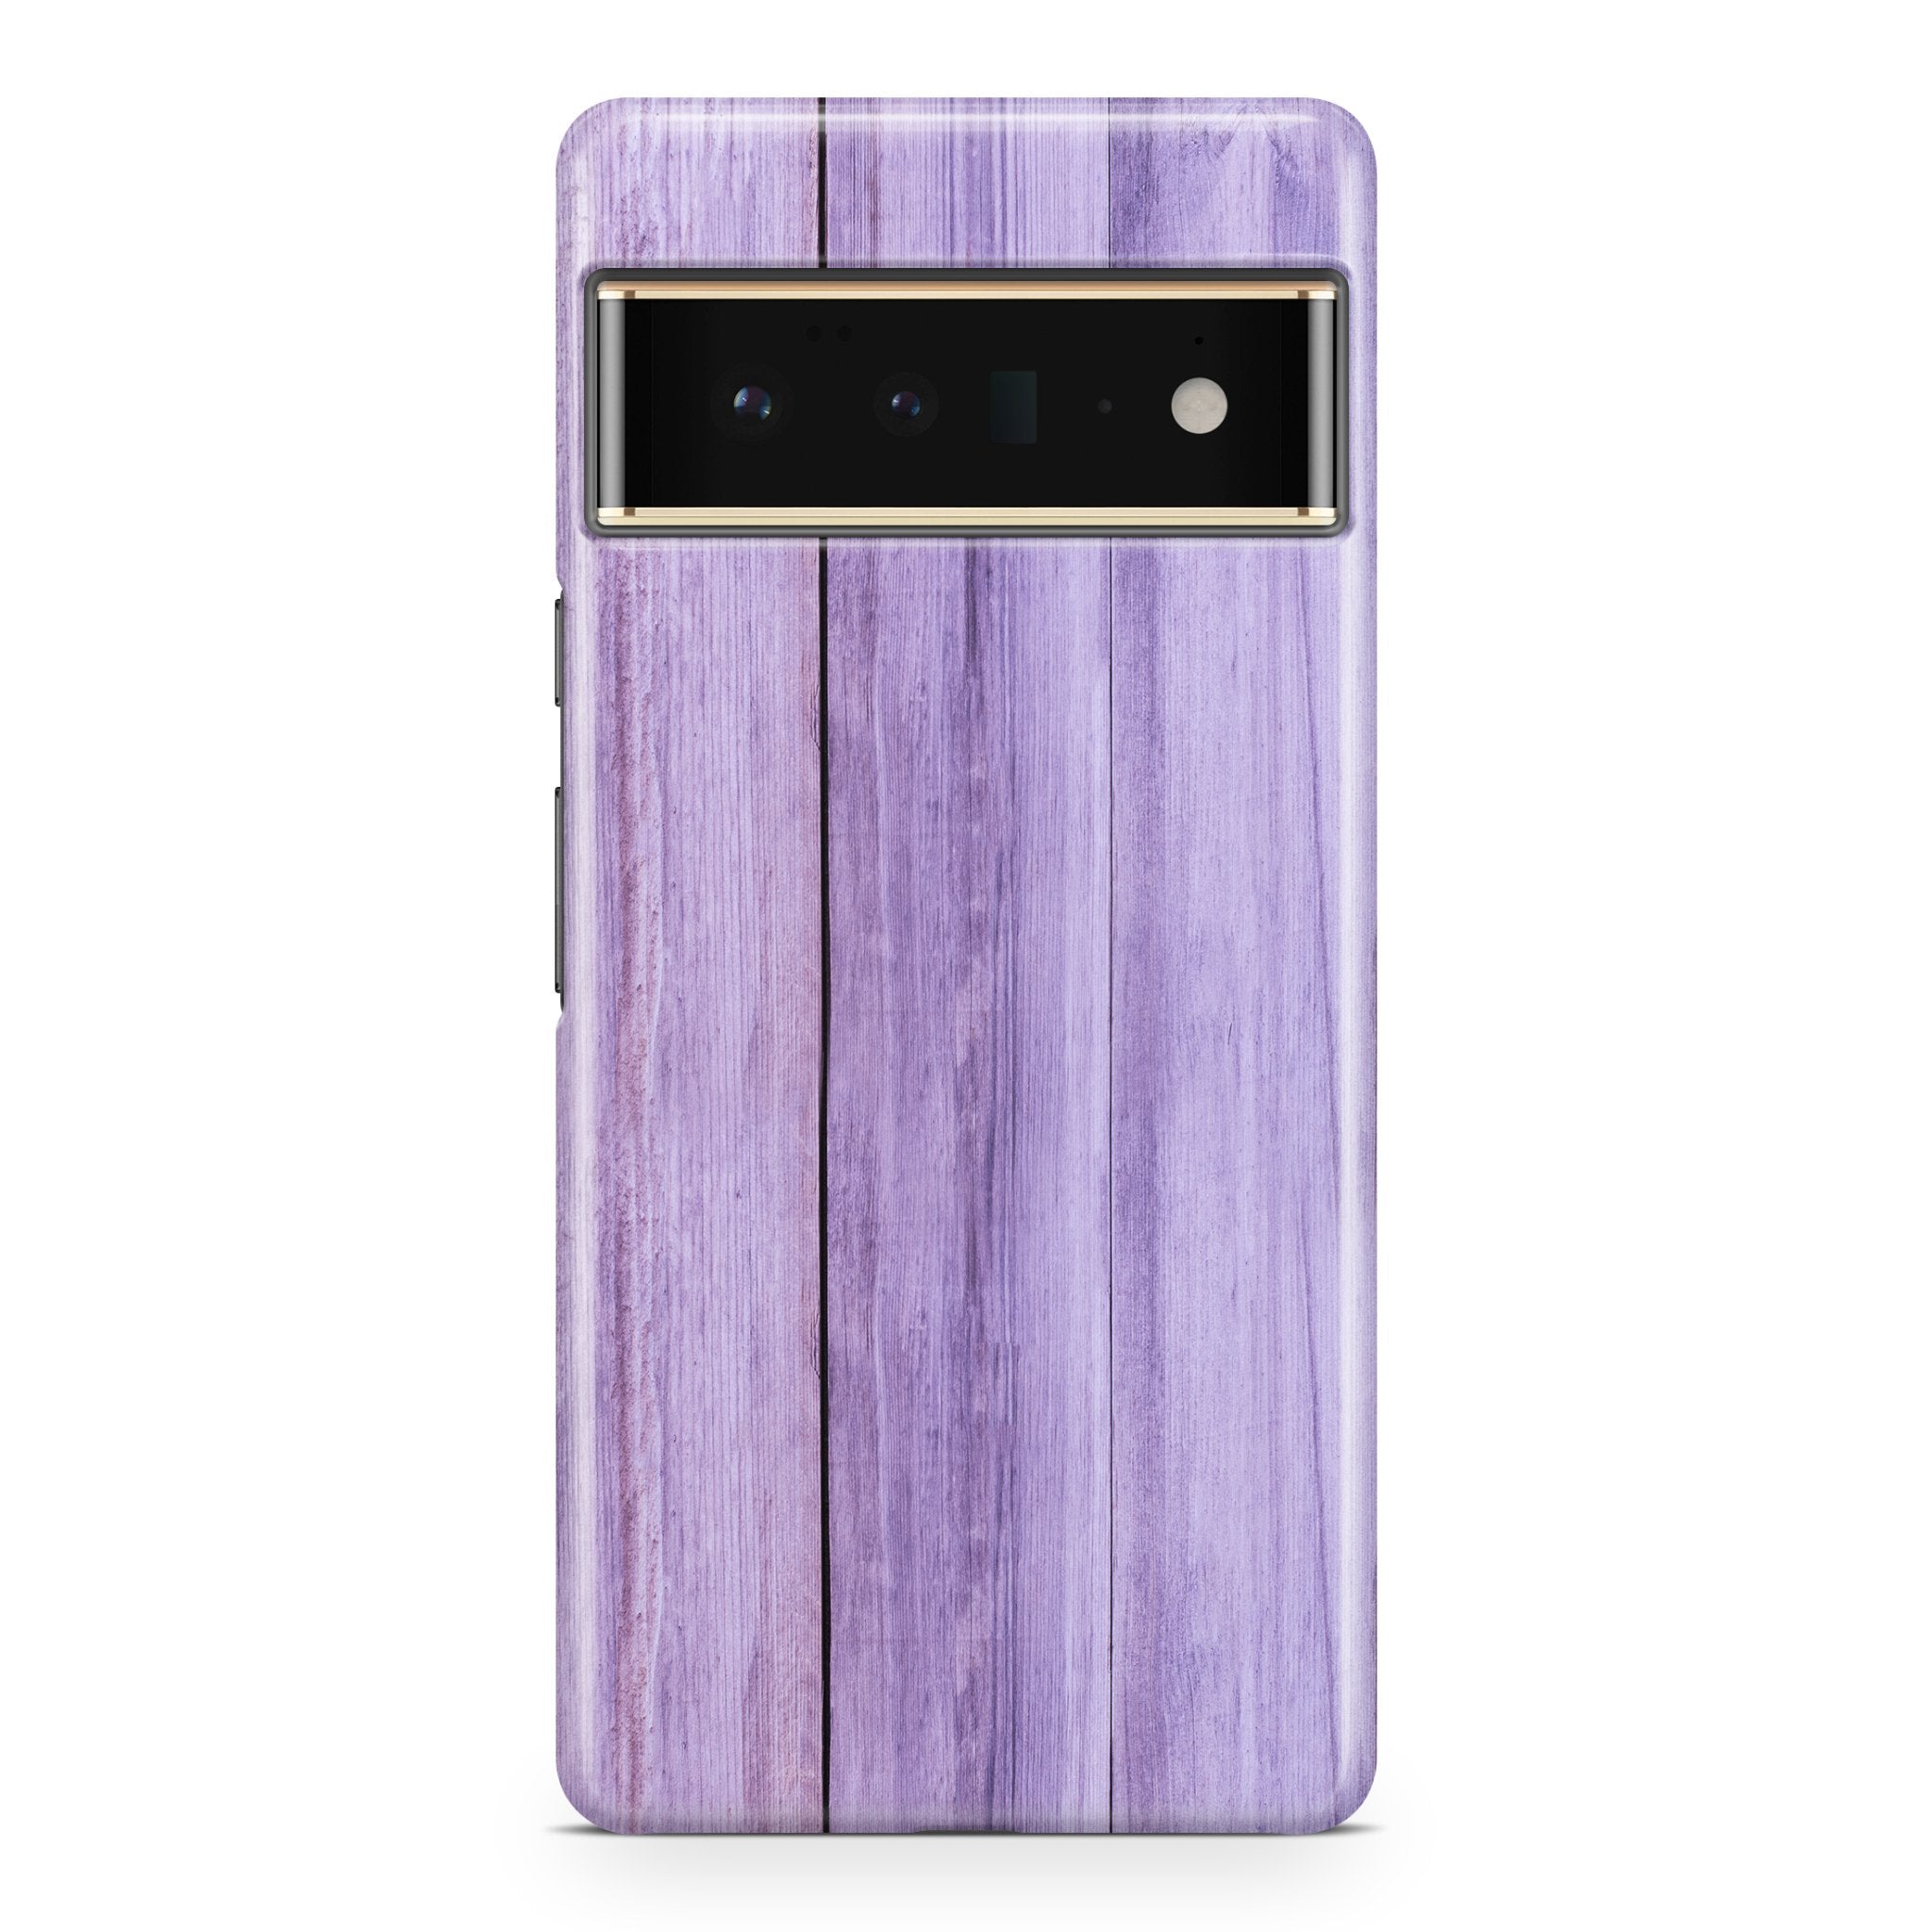 Purple Wood - Google phone case designs by CaseSwagger